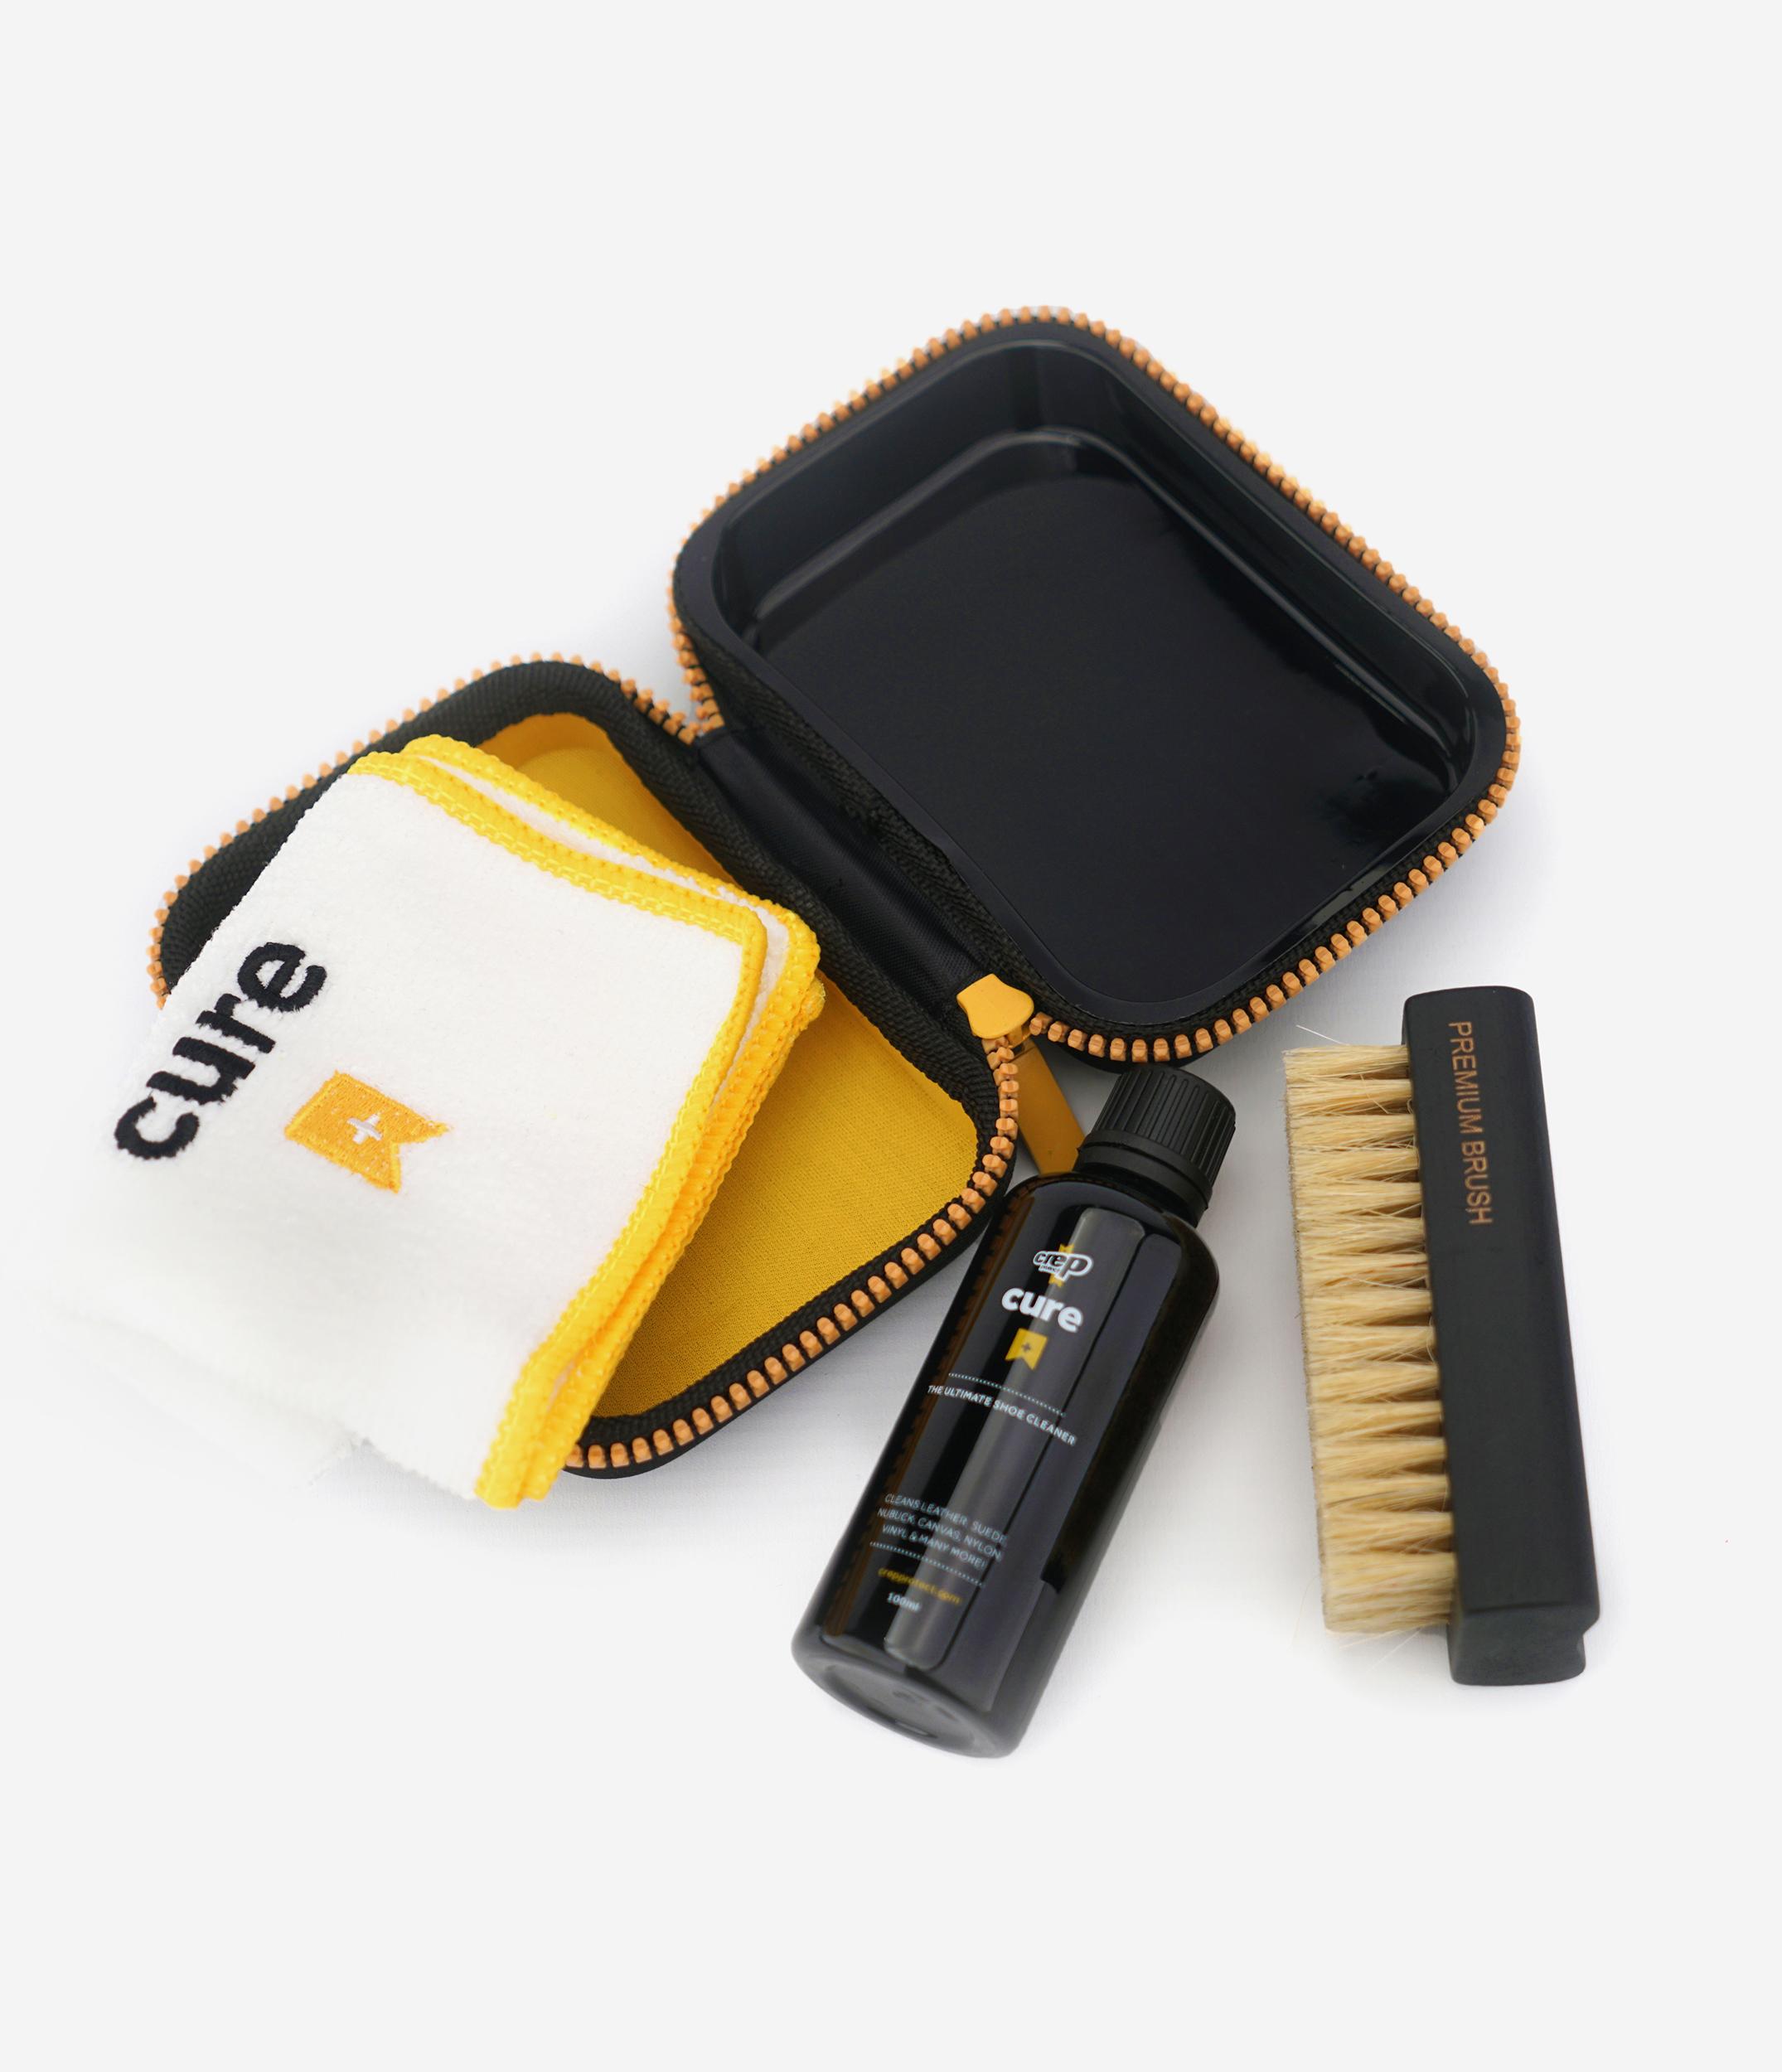 Crep Protect Cure Cleaning Travel Kit